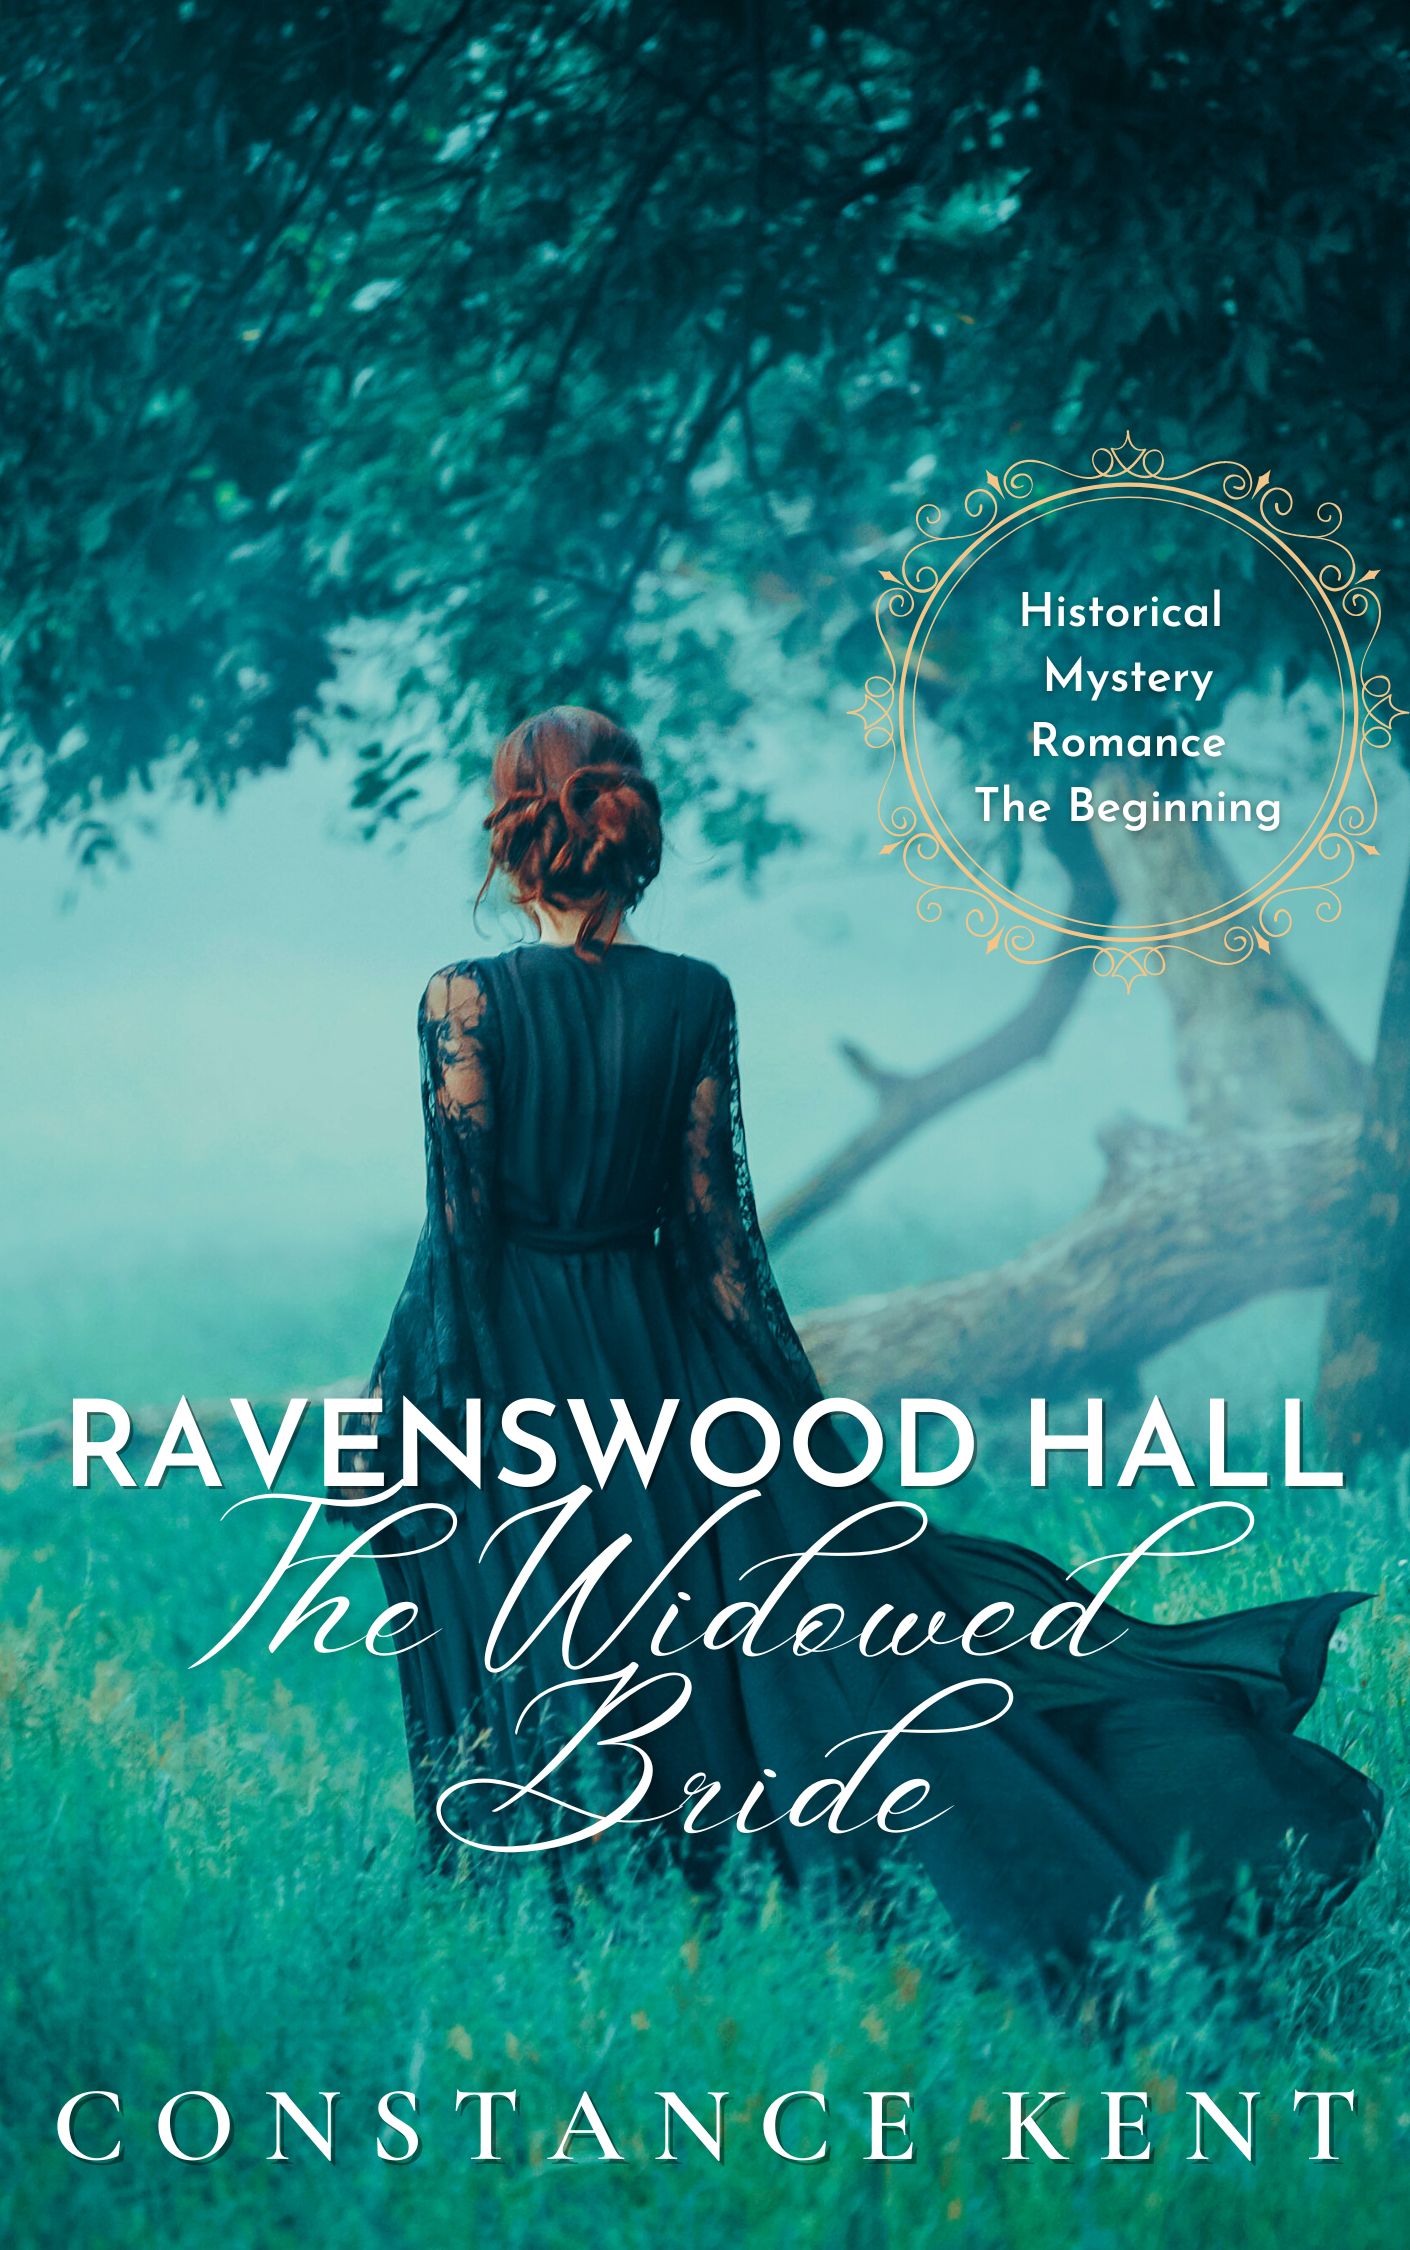 Ravenswood Hall: The Widowed Bride - The Beginning